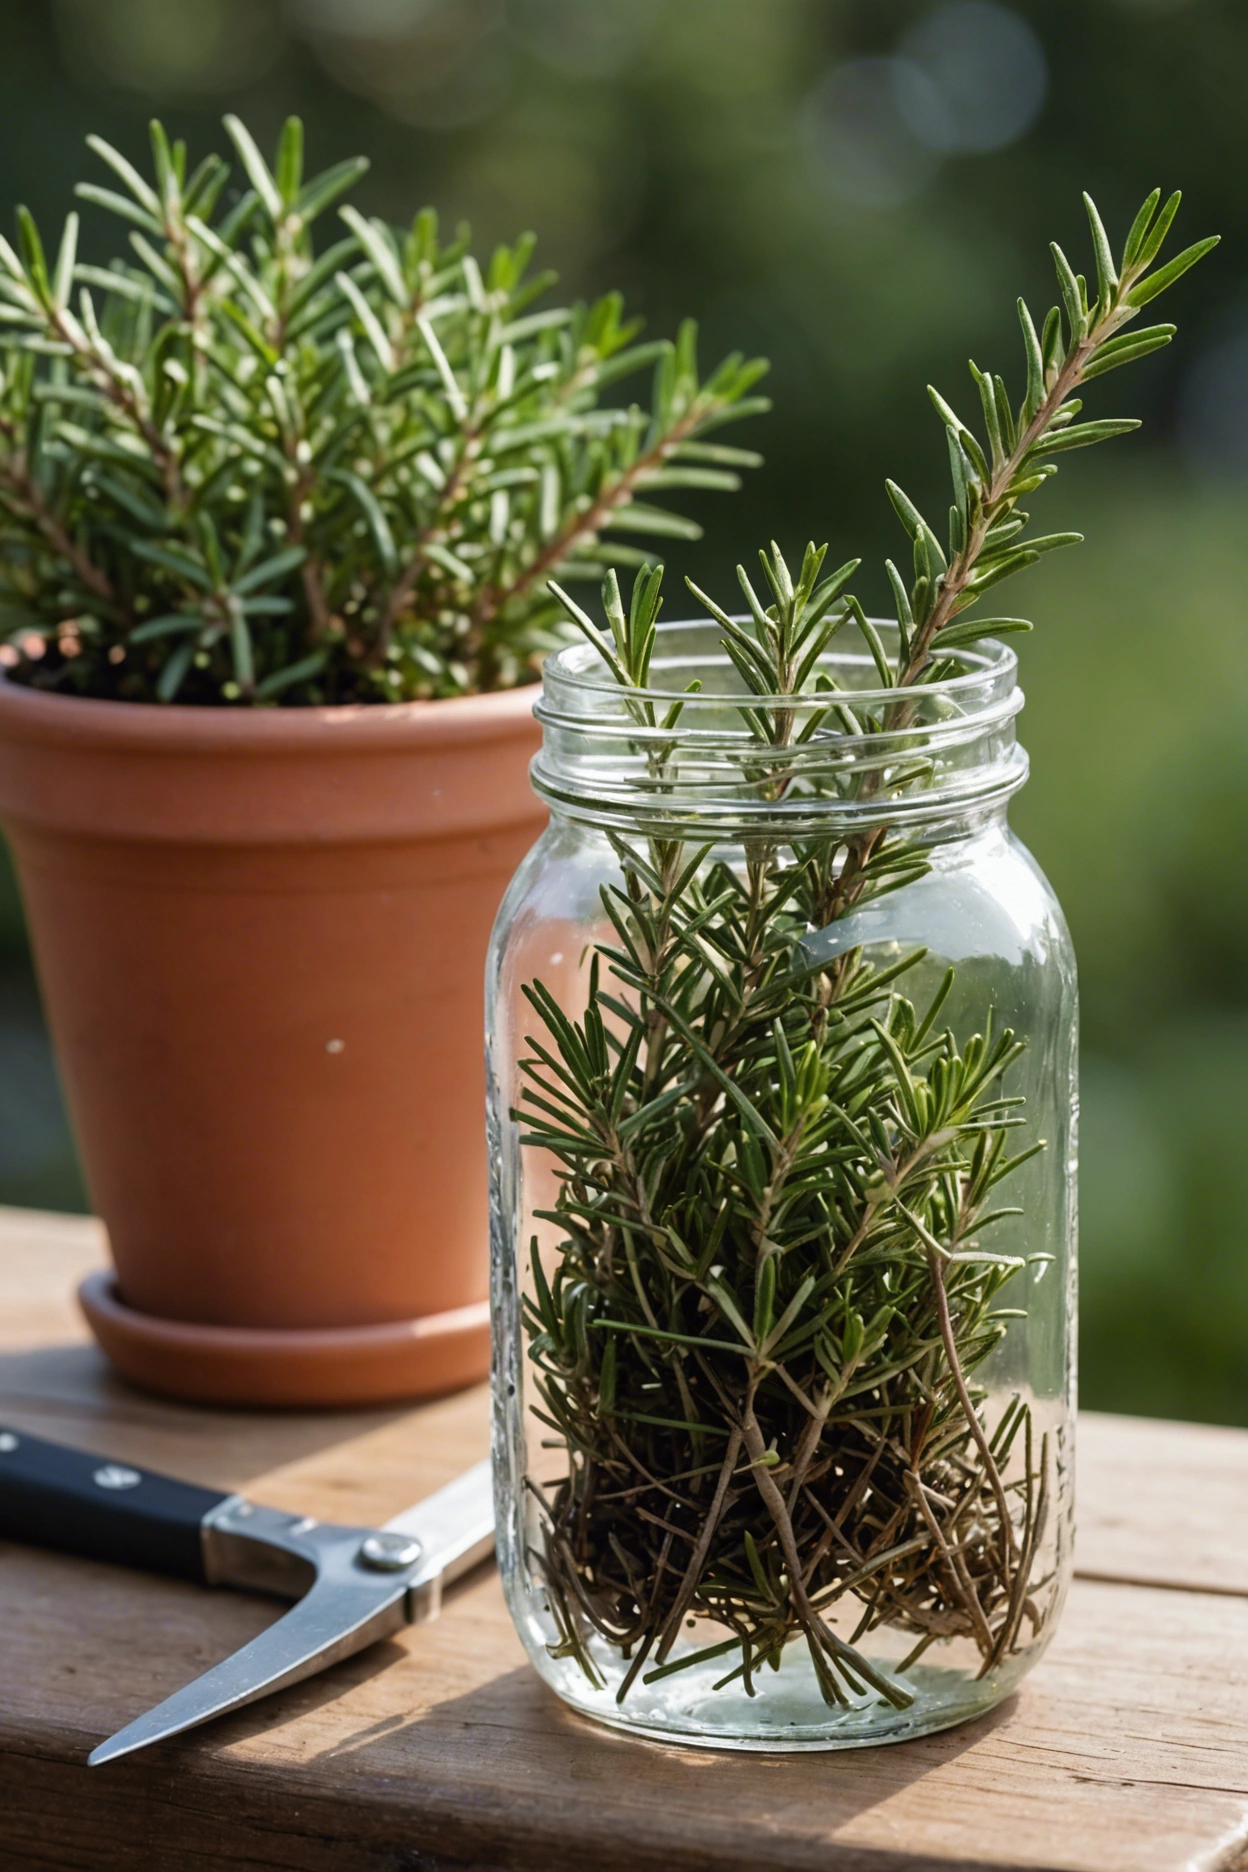 "Close-up of a healthy rosemary plant with new growth, next to gardening shears and a water jar, indicating propagation process."